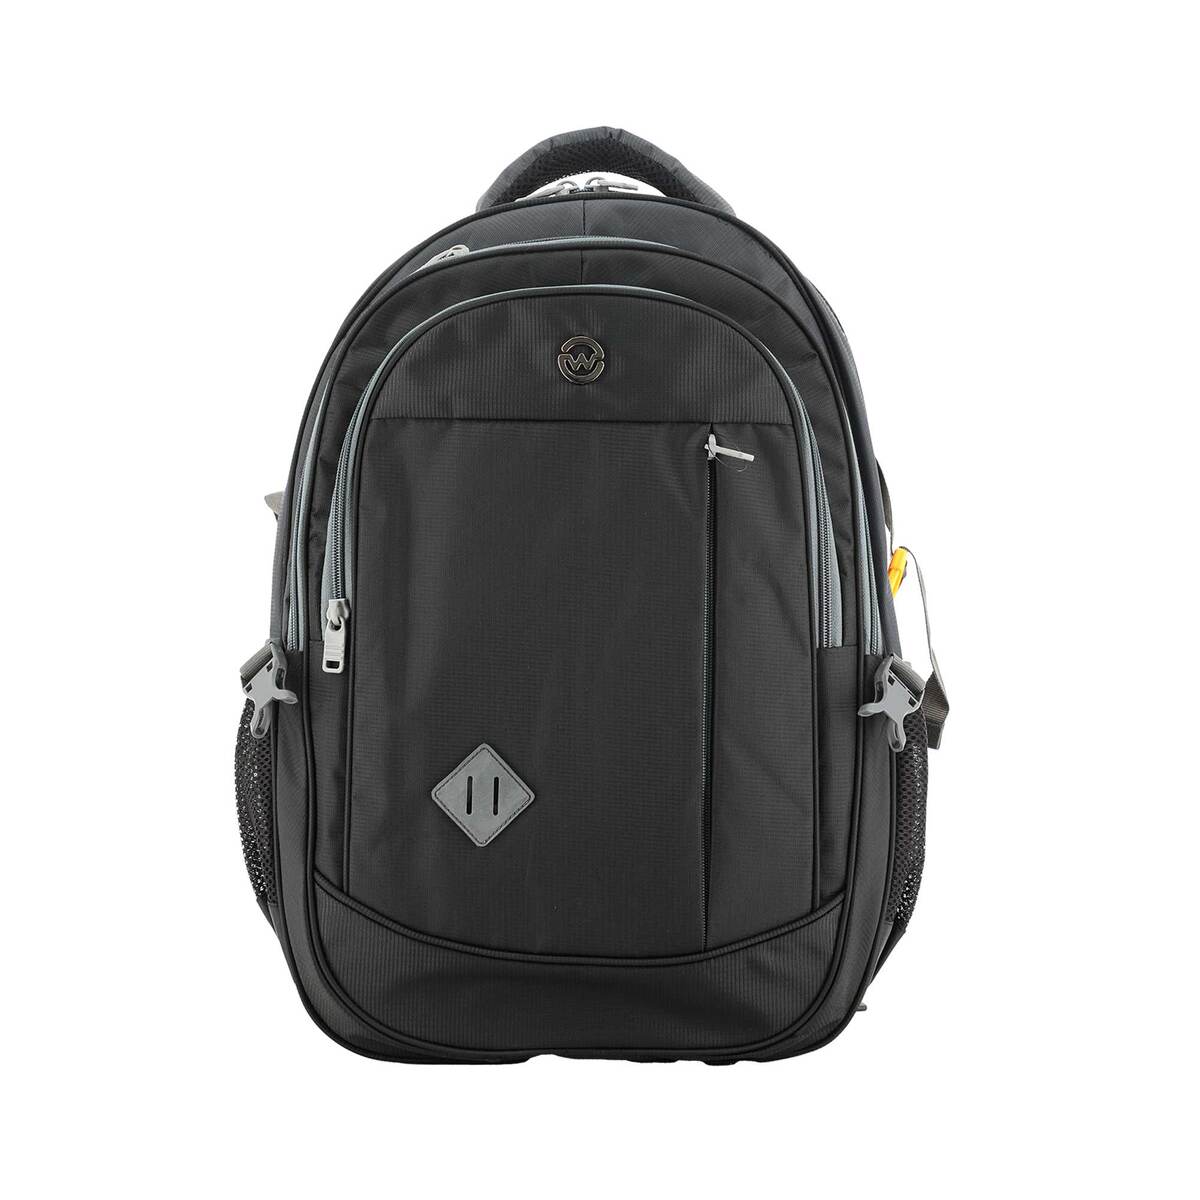 Wagon R Vibrant Backpack 8008 19inch